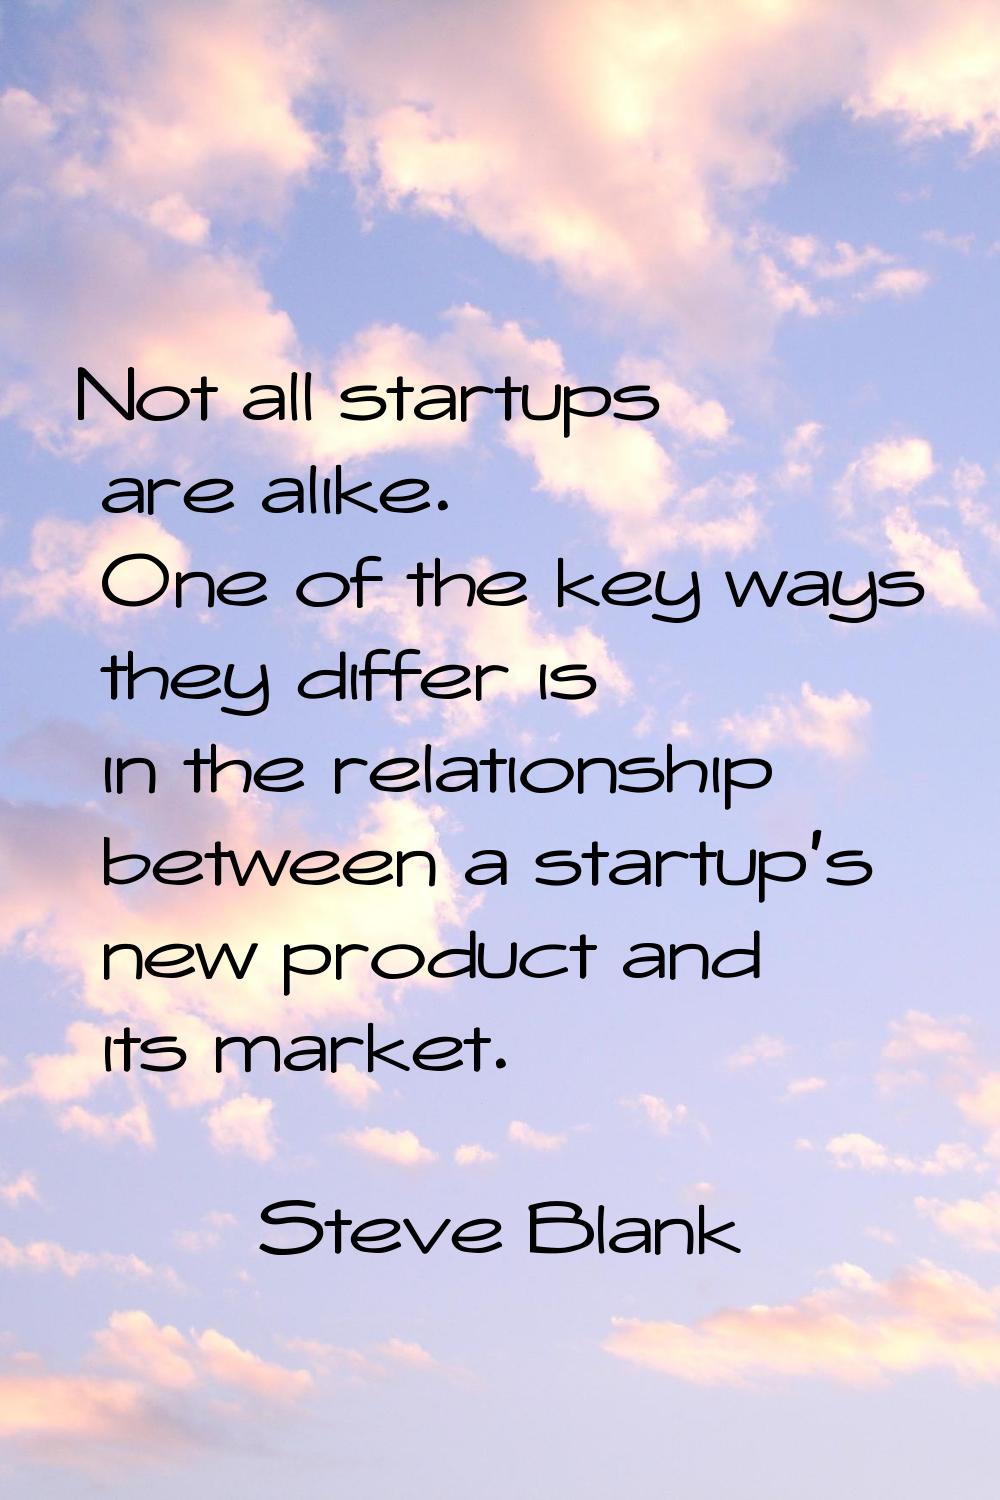 Not all startups are alike. One of the key ways they differ is in the relationship between a startu